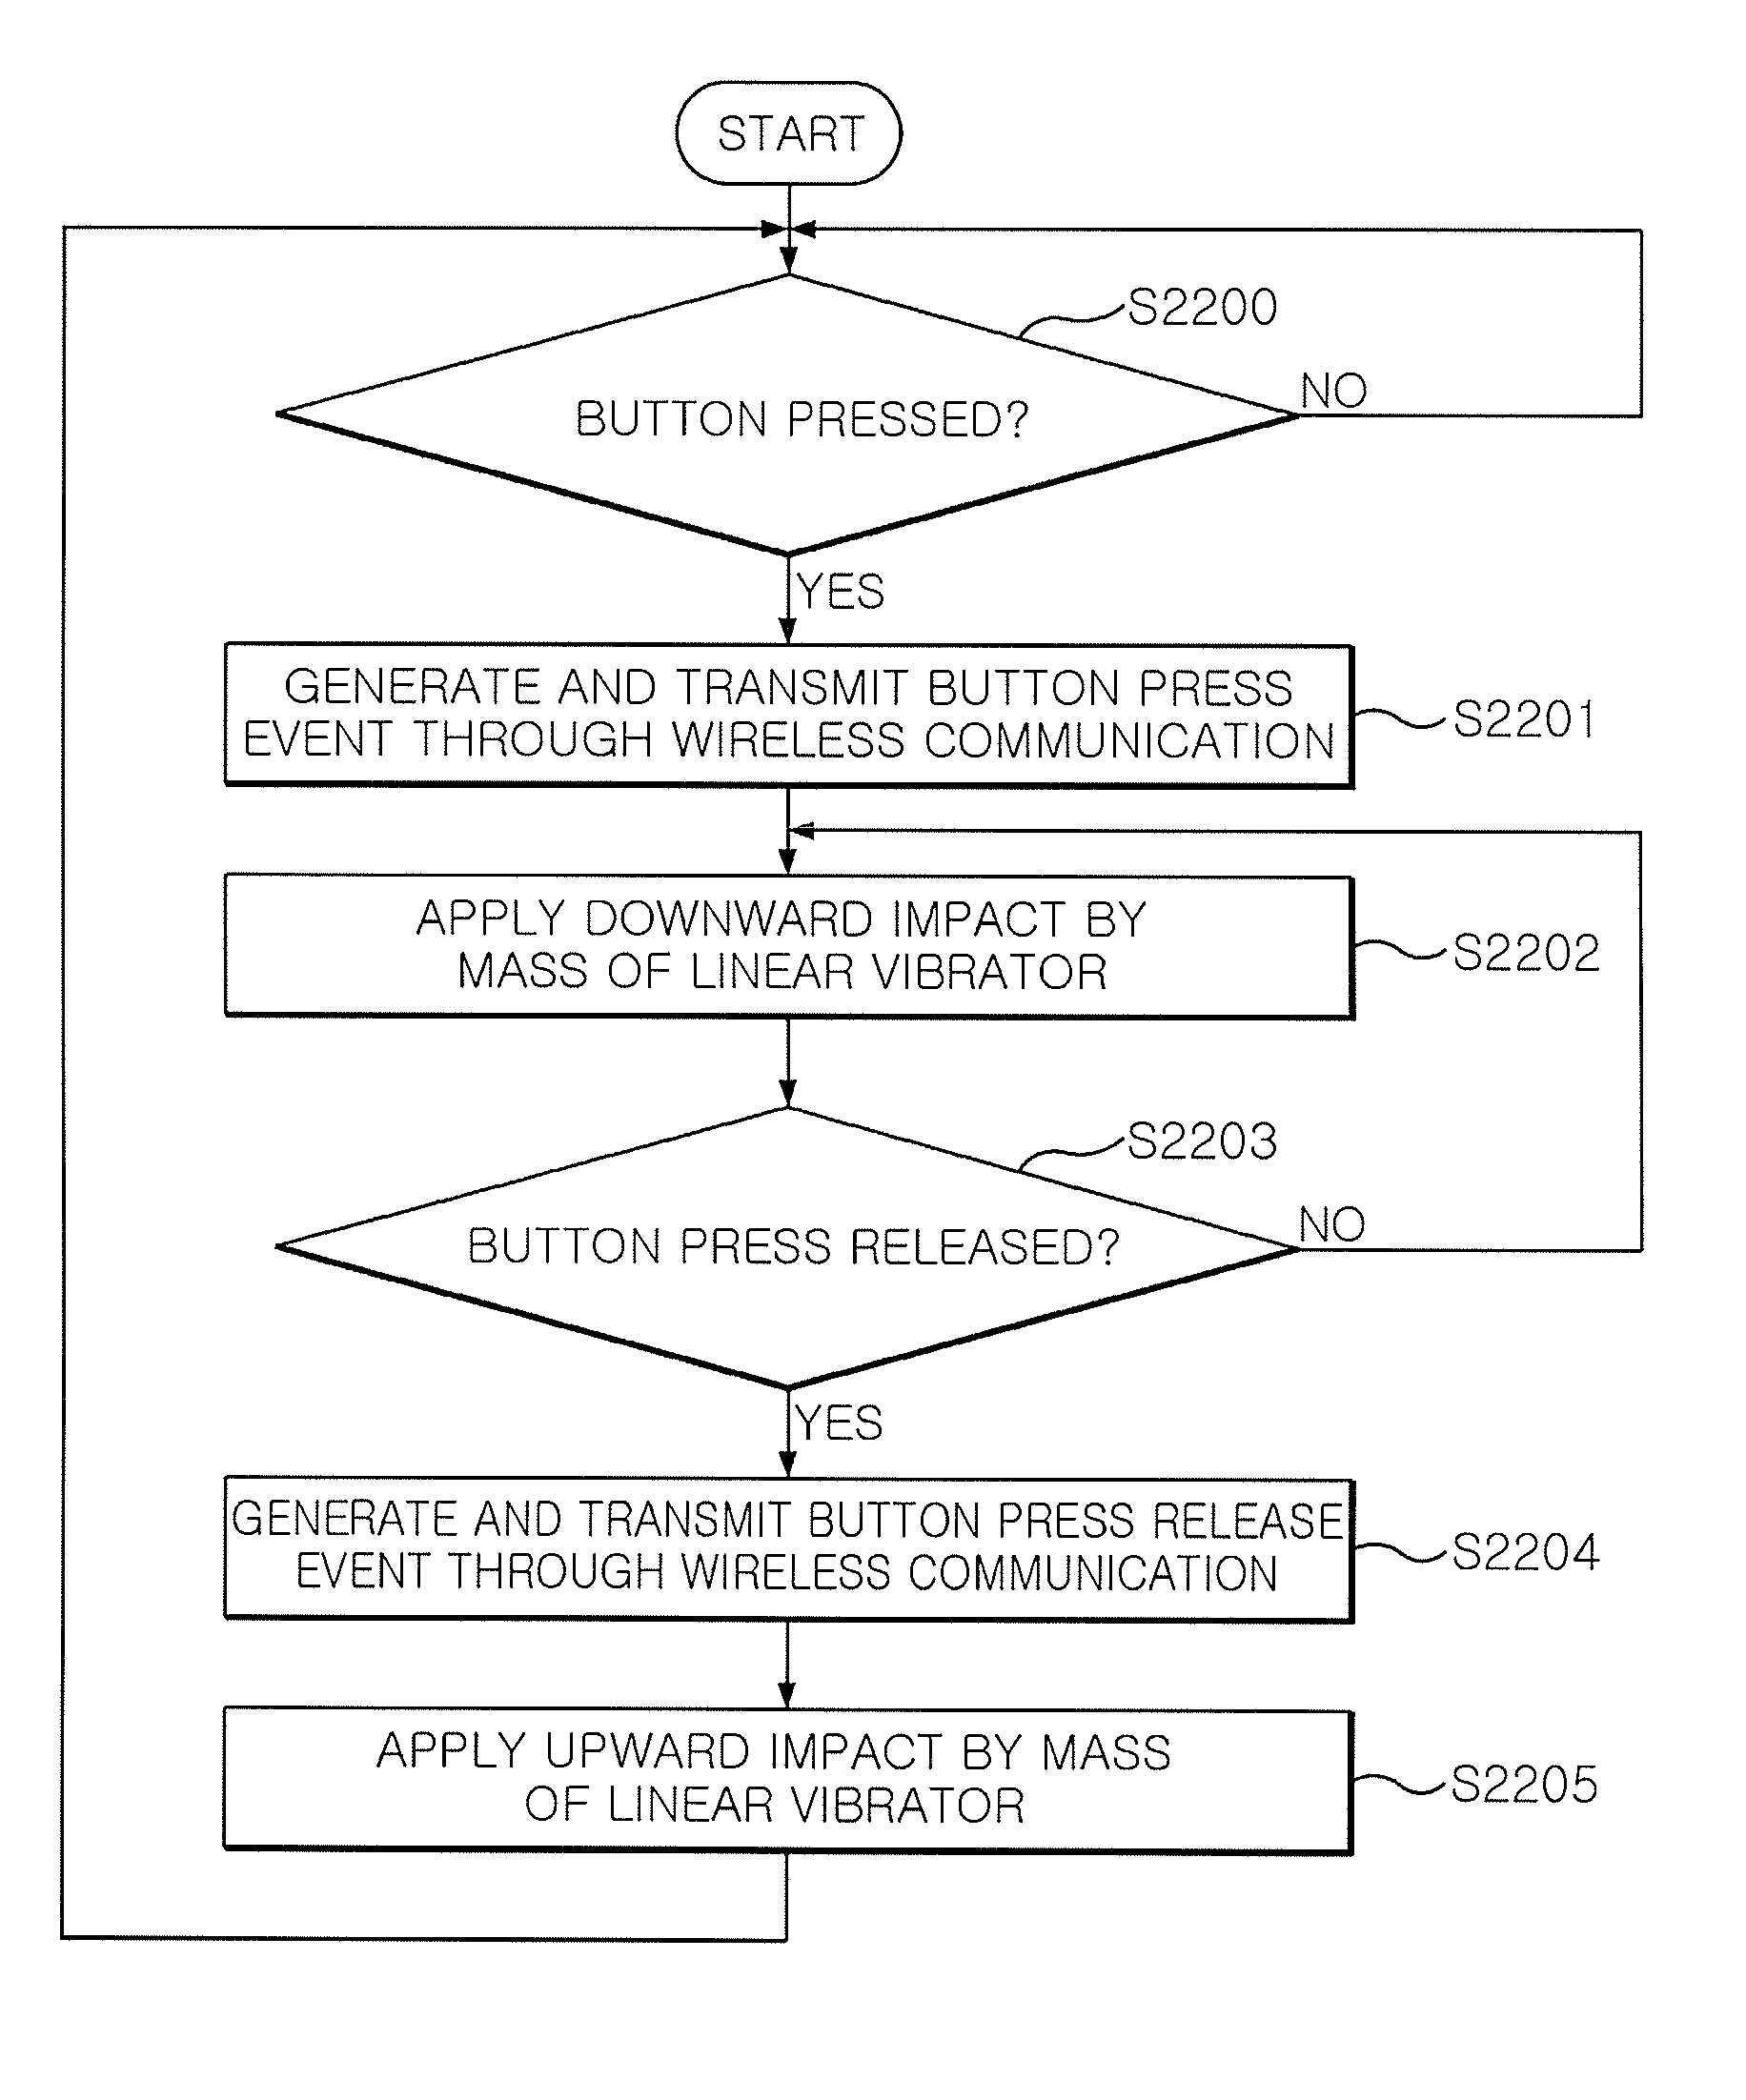 Pointing apparatus capable of providing haptic feedback, and haptic interaction system and method using the same